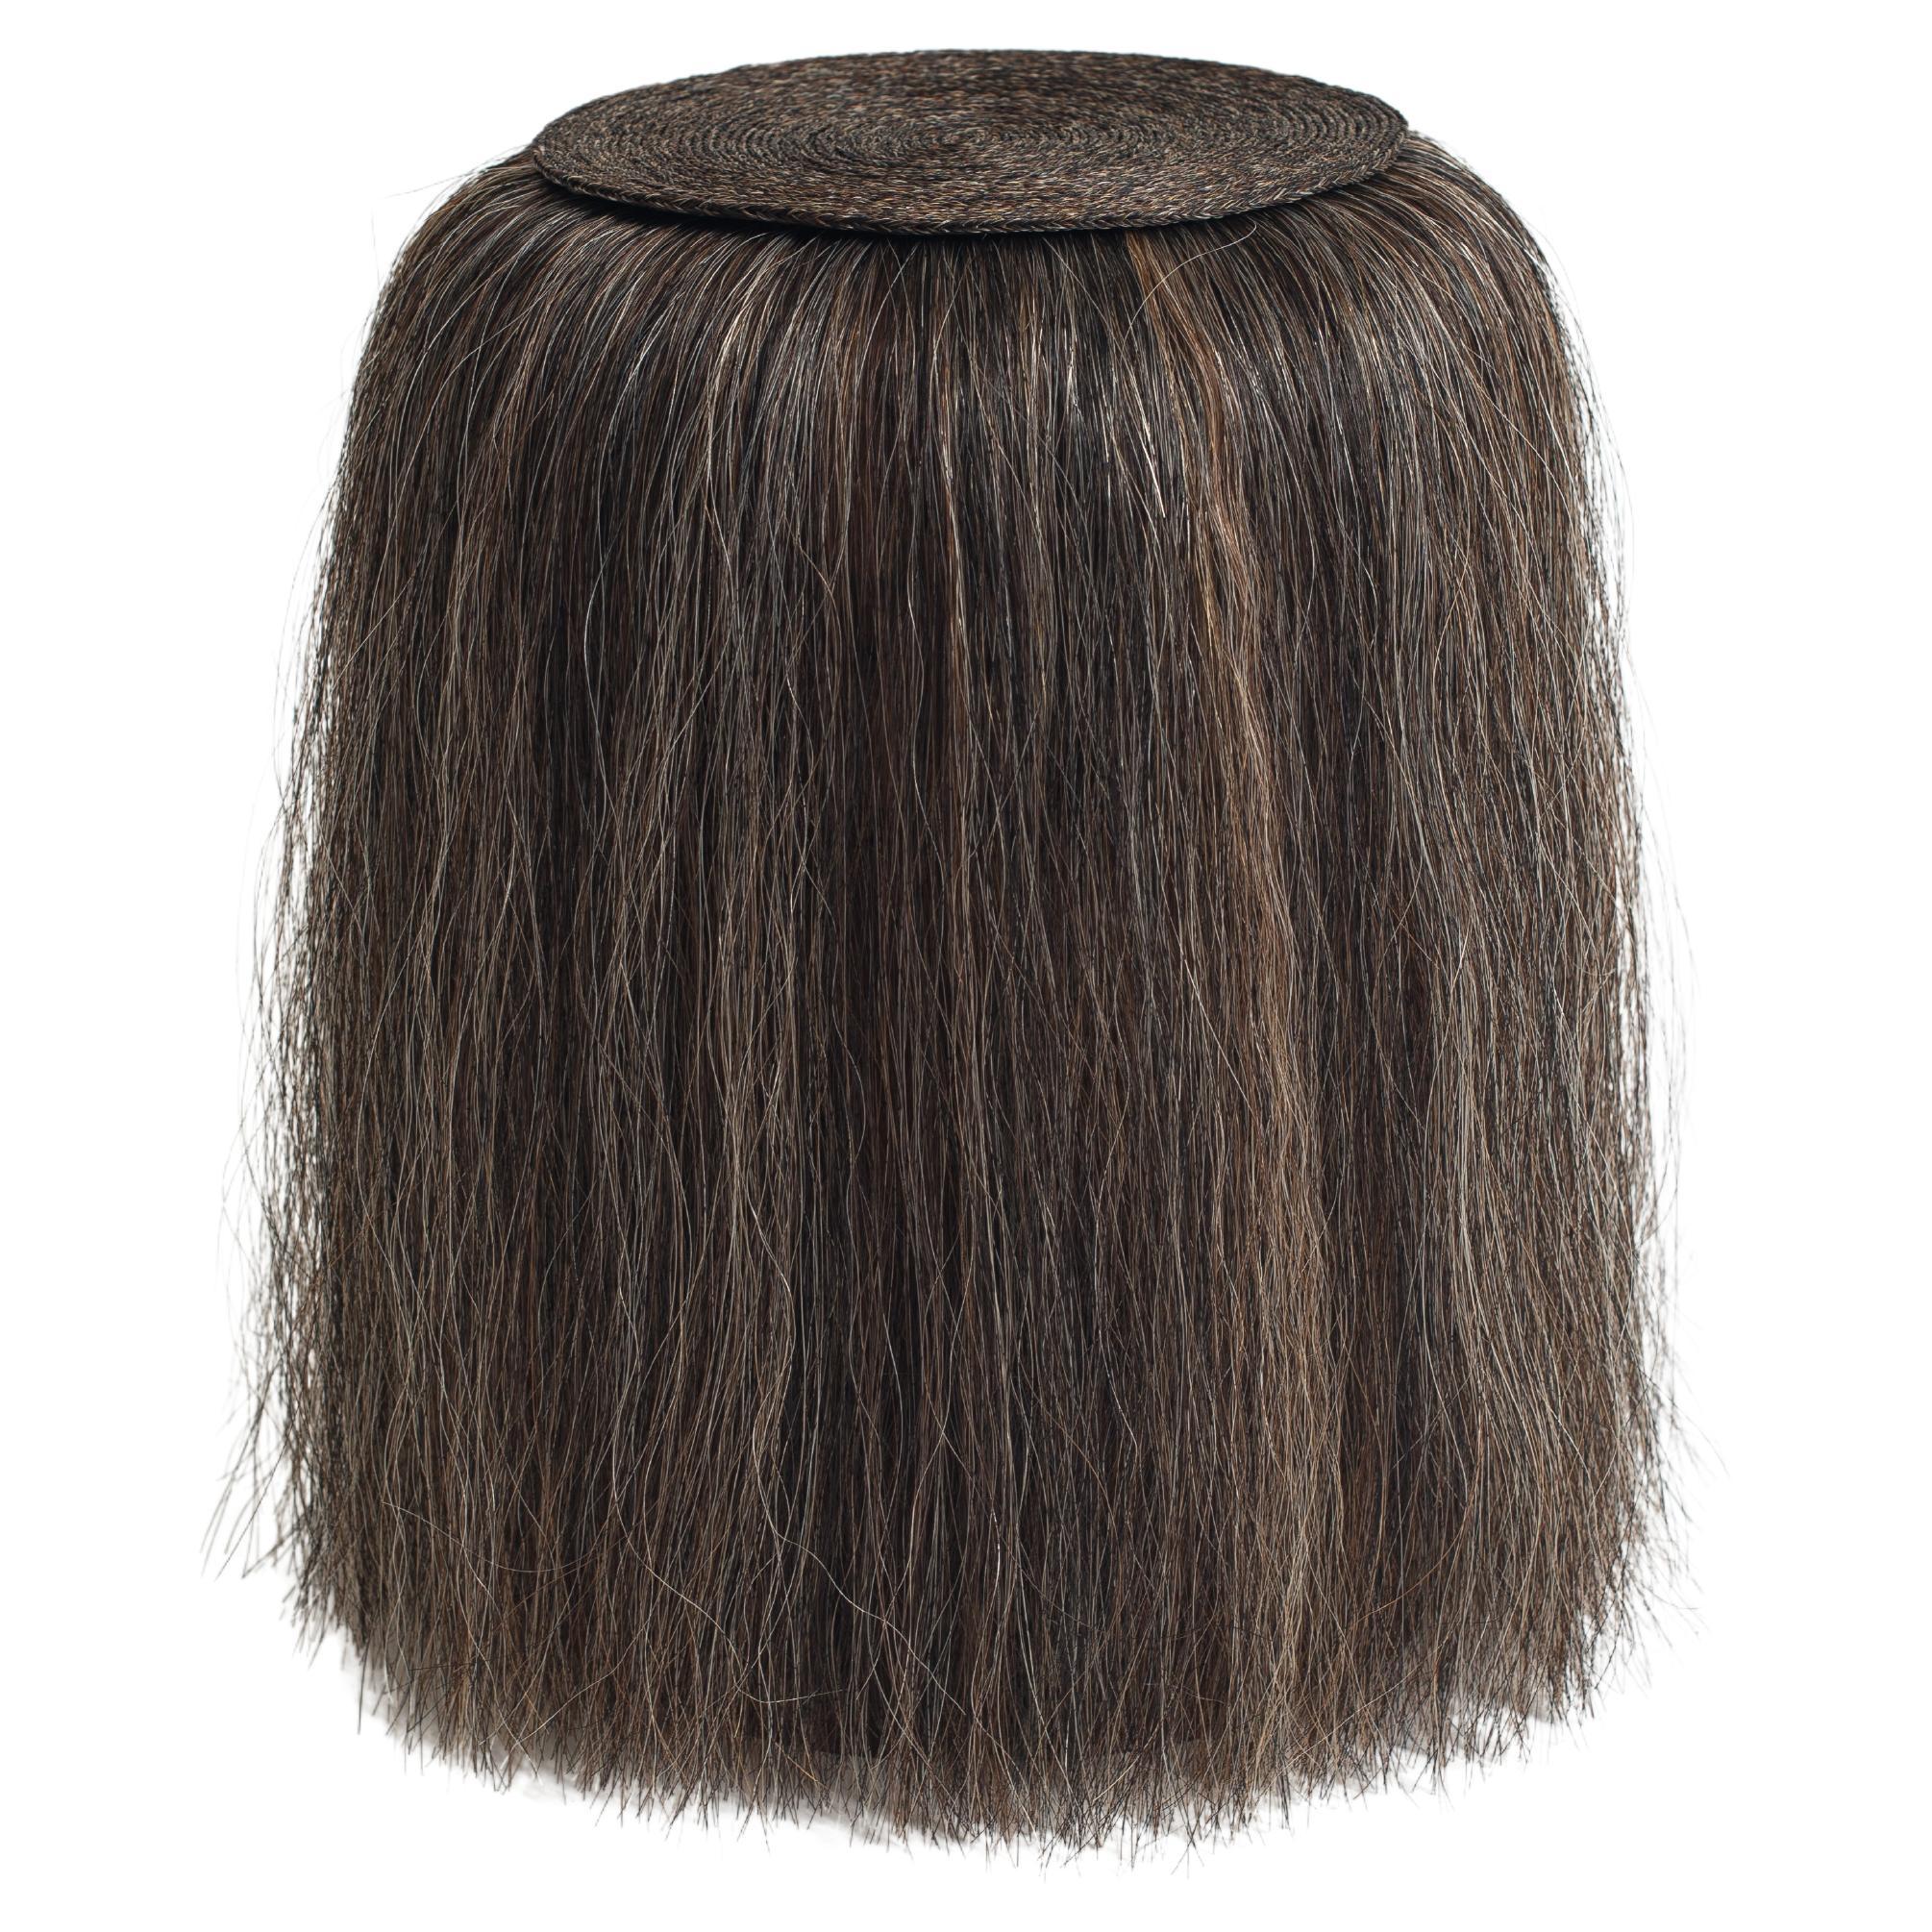 Cuaco Stool - Brown handwoven horsehair solid wood stool from Mexico. For Sale